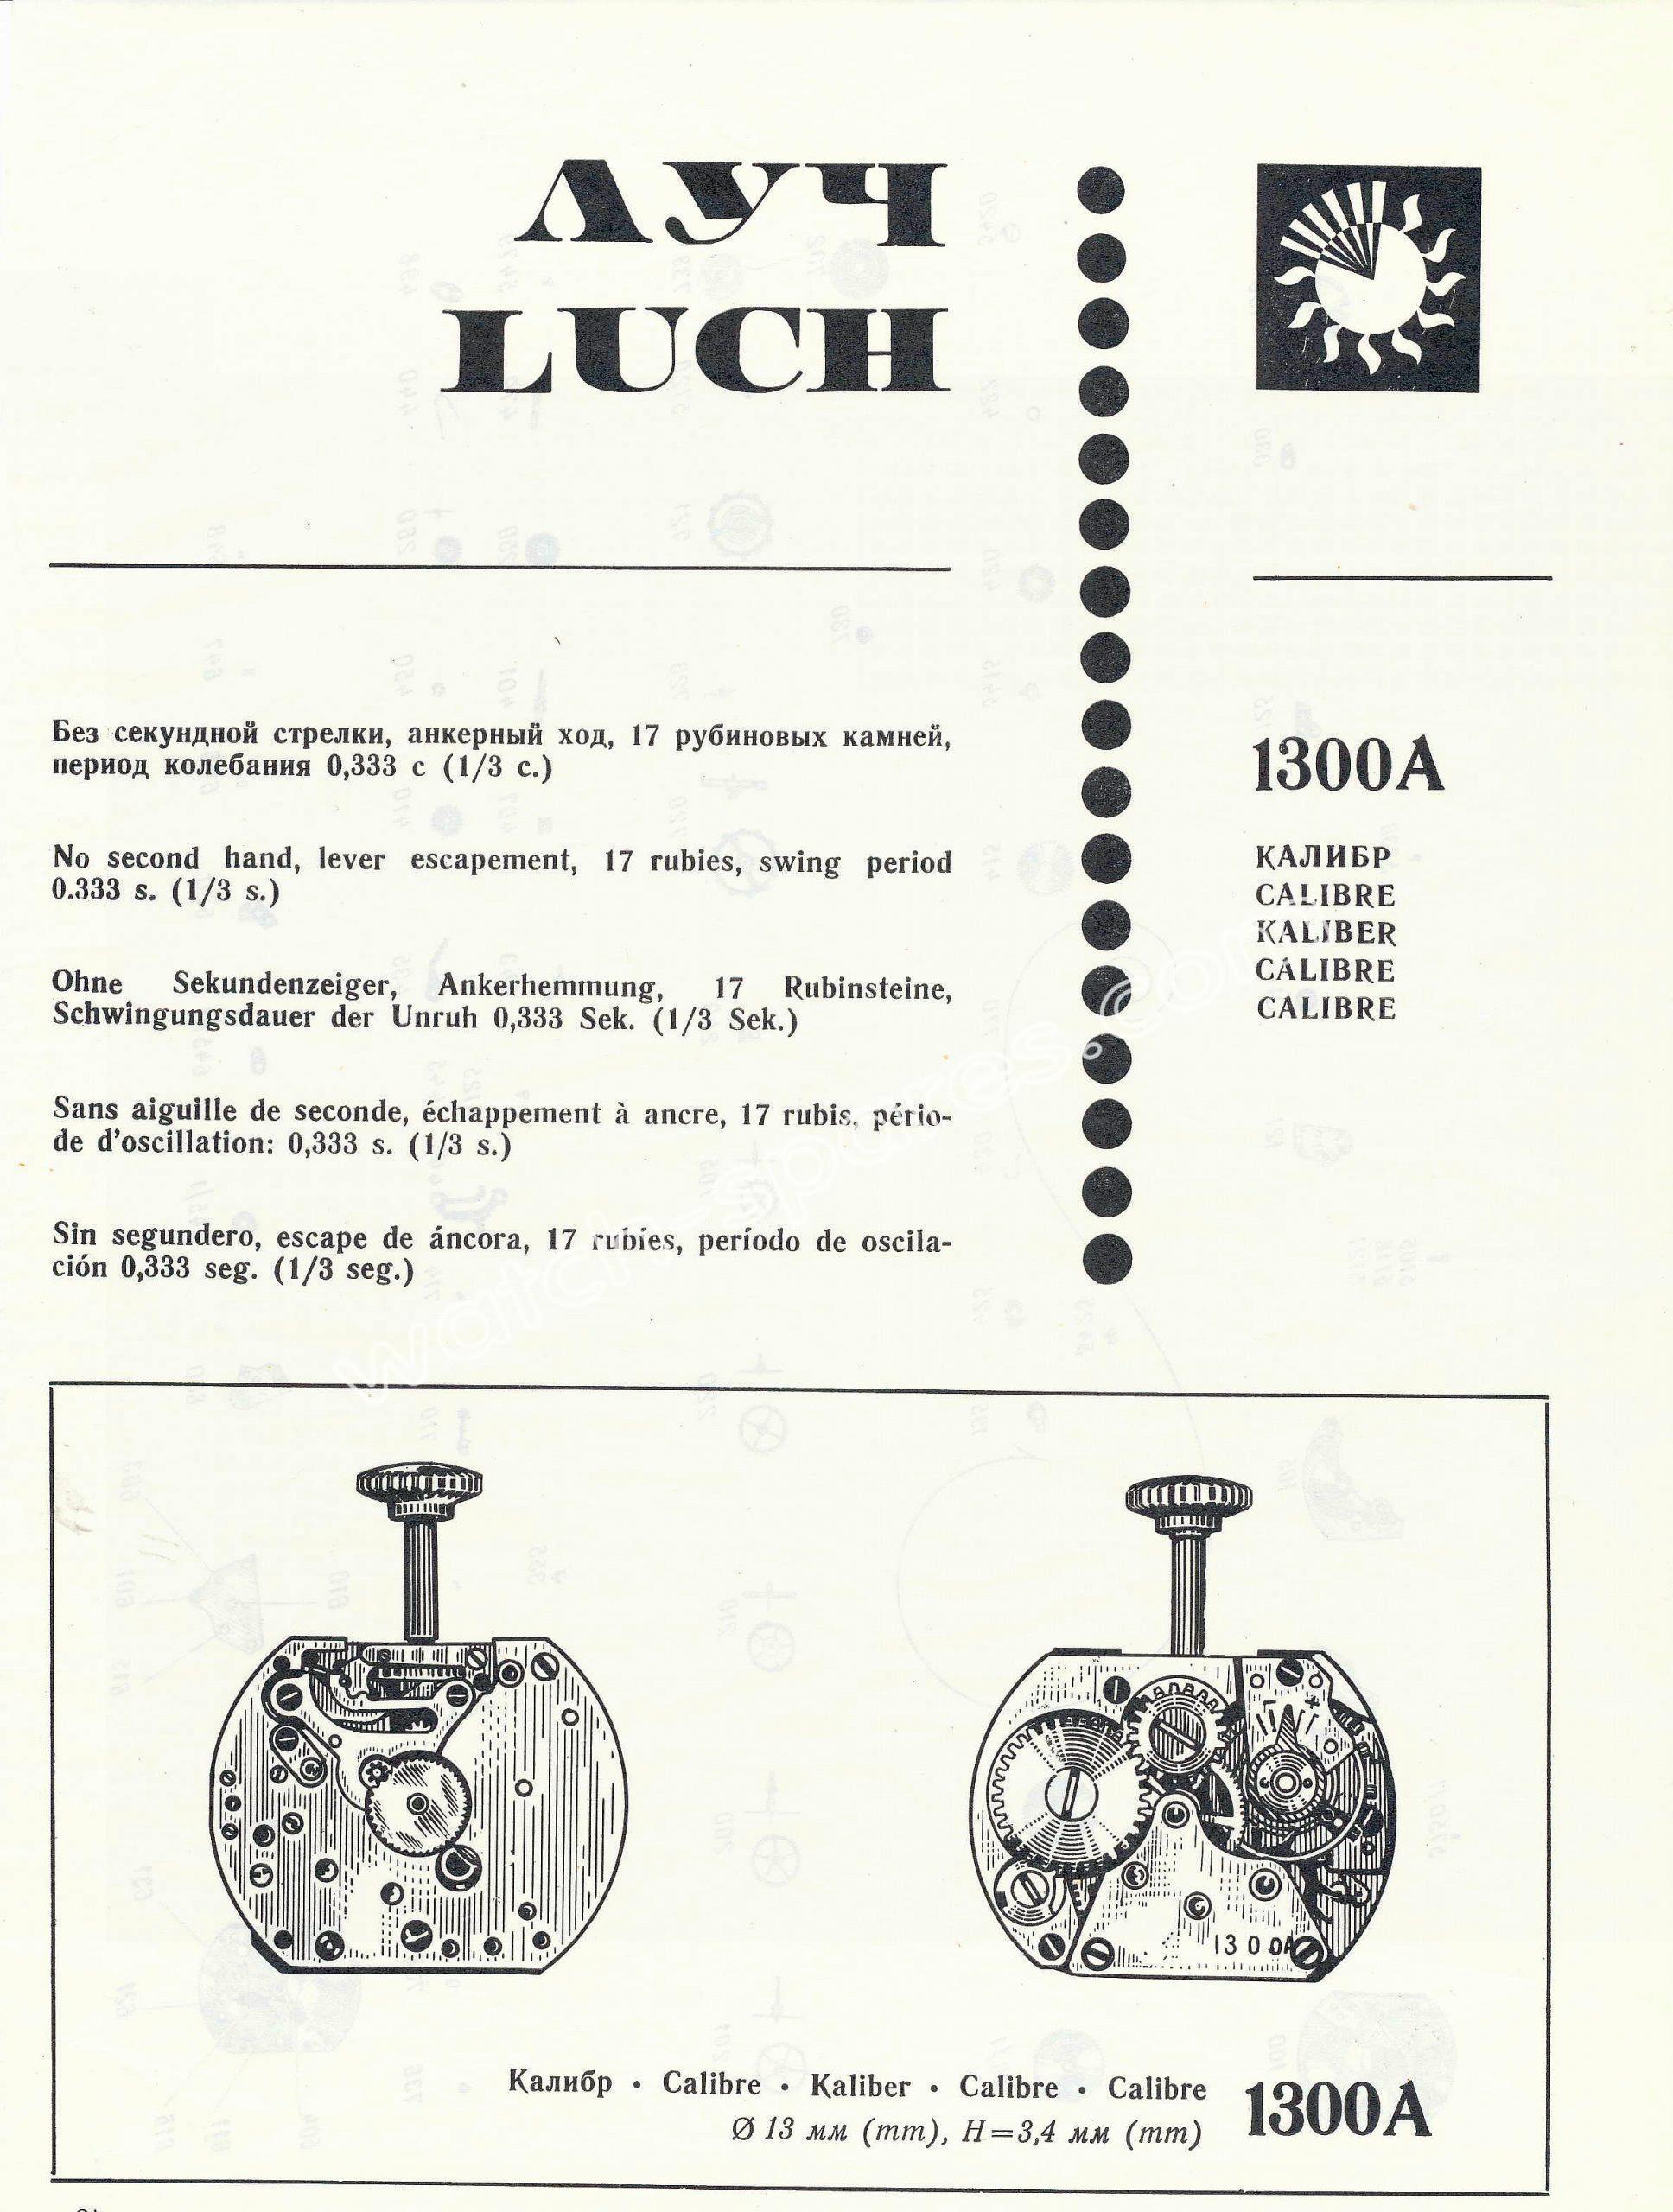 Luch 1300A watch movements